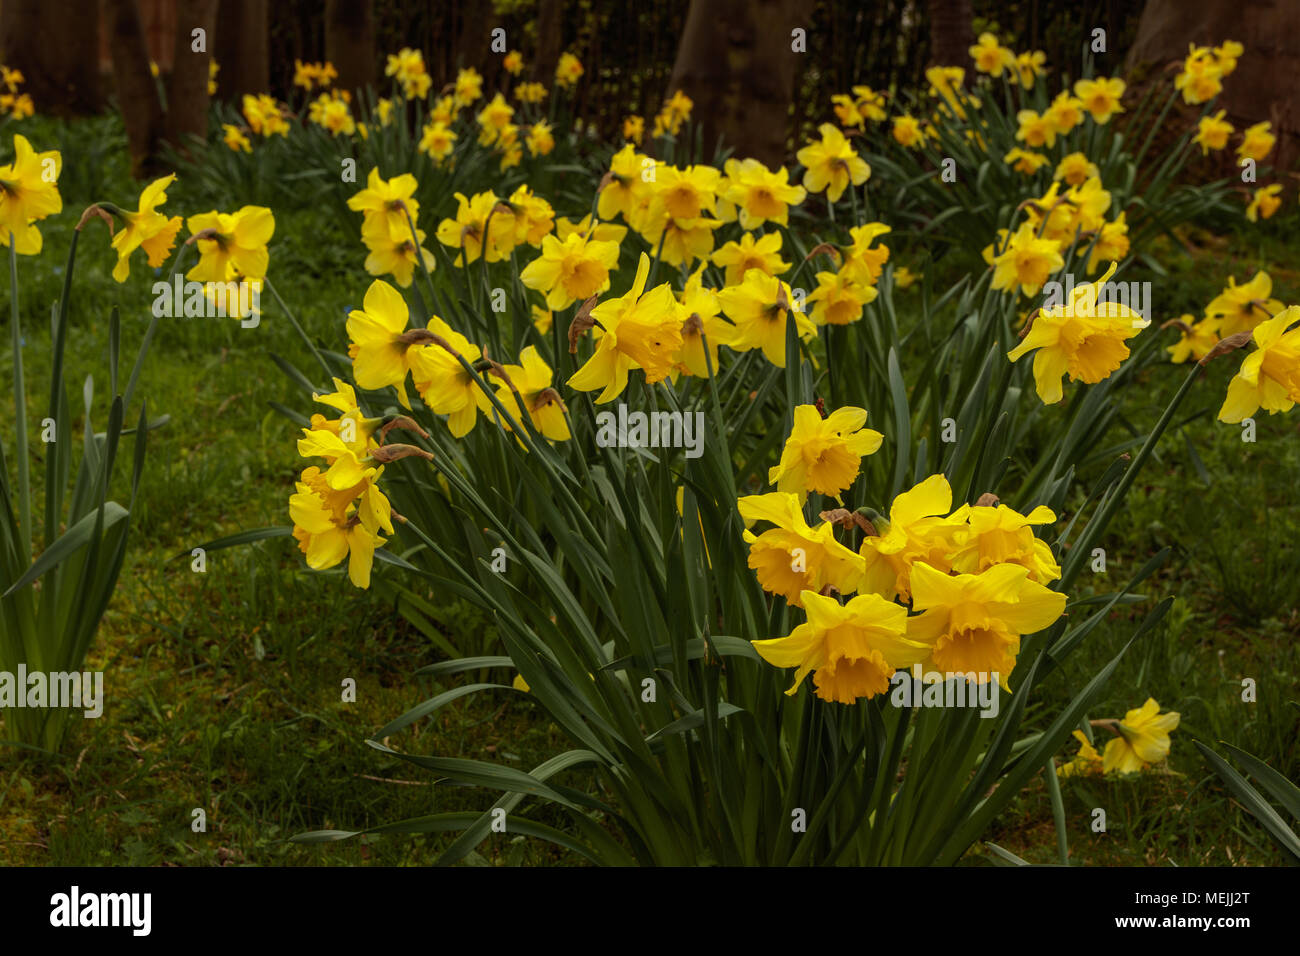 Daffodils growing in a park Stock Photo